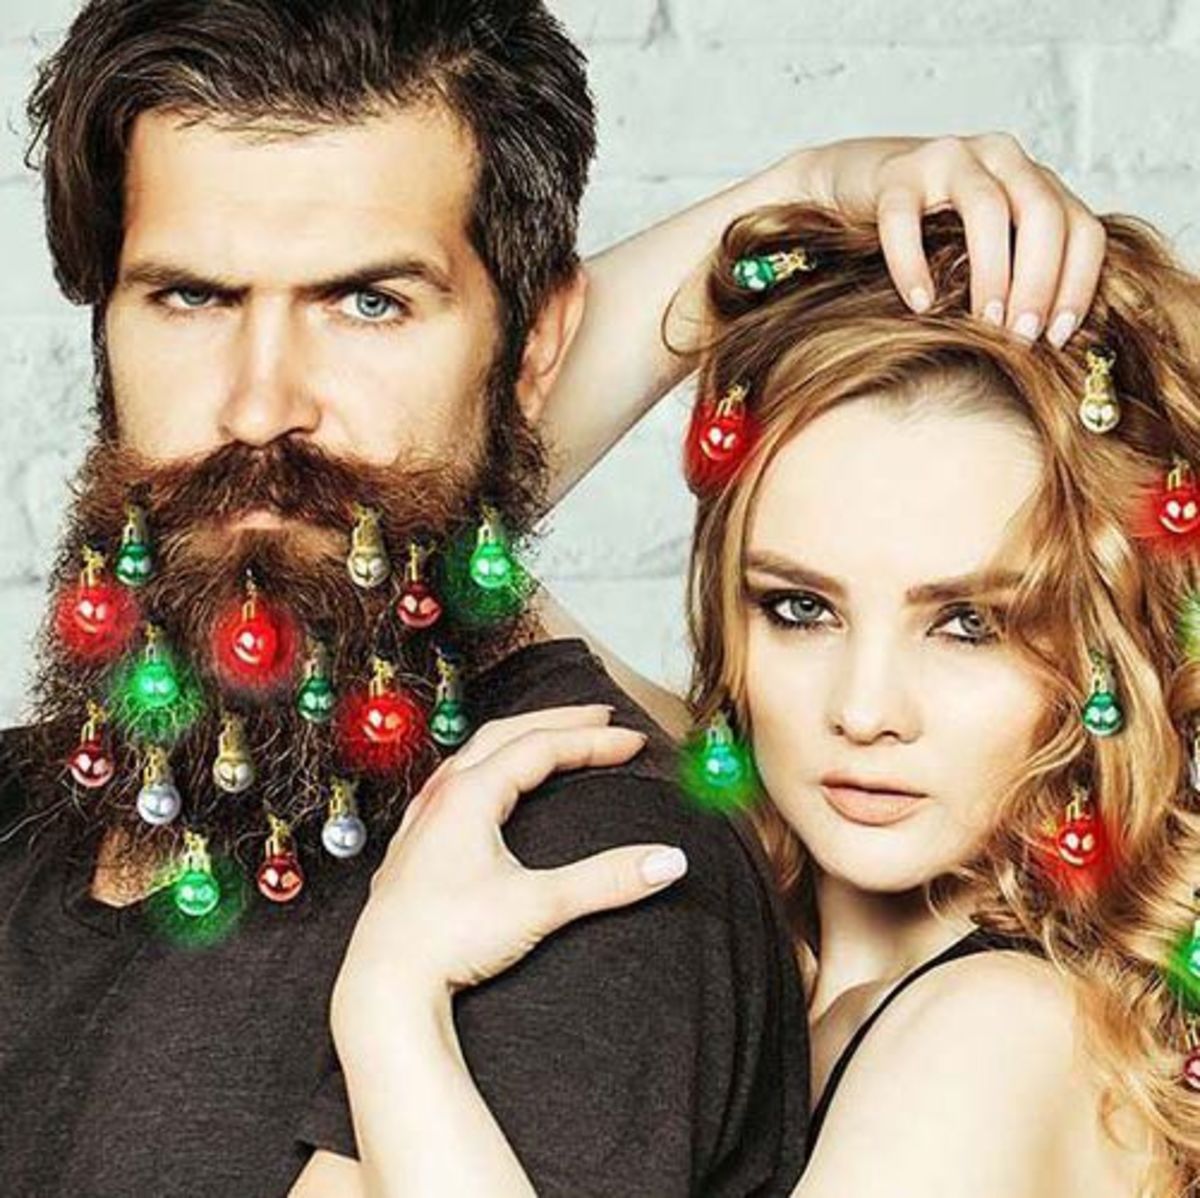 How about decorating your hair and your beard with Christmas Baubles and Beard Ornaments